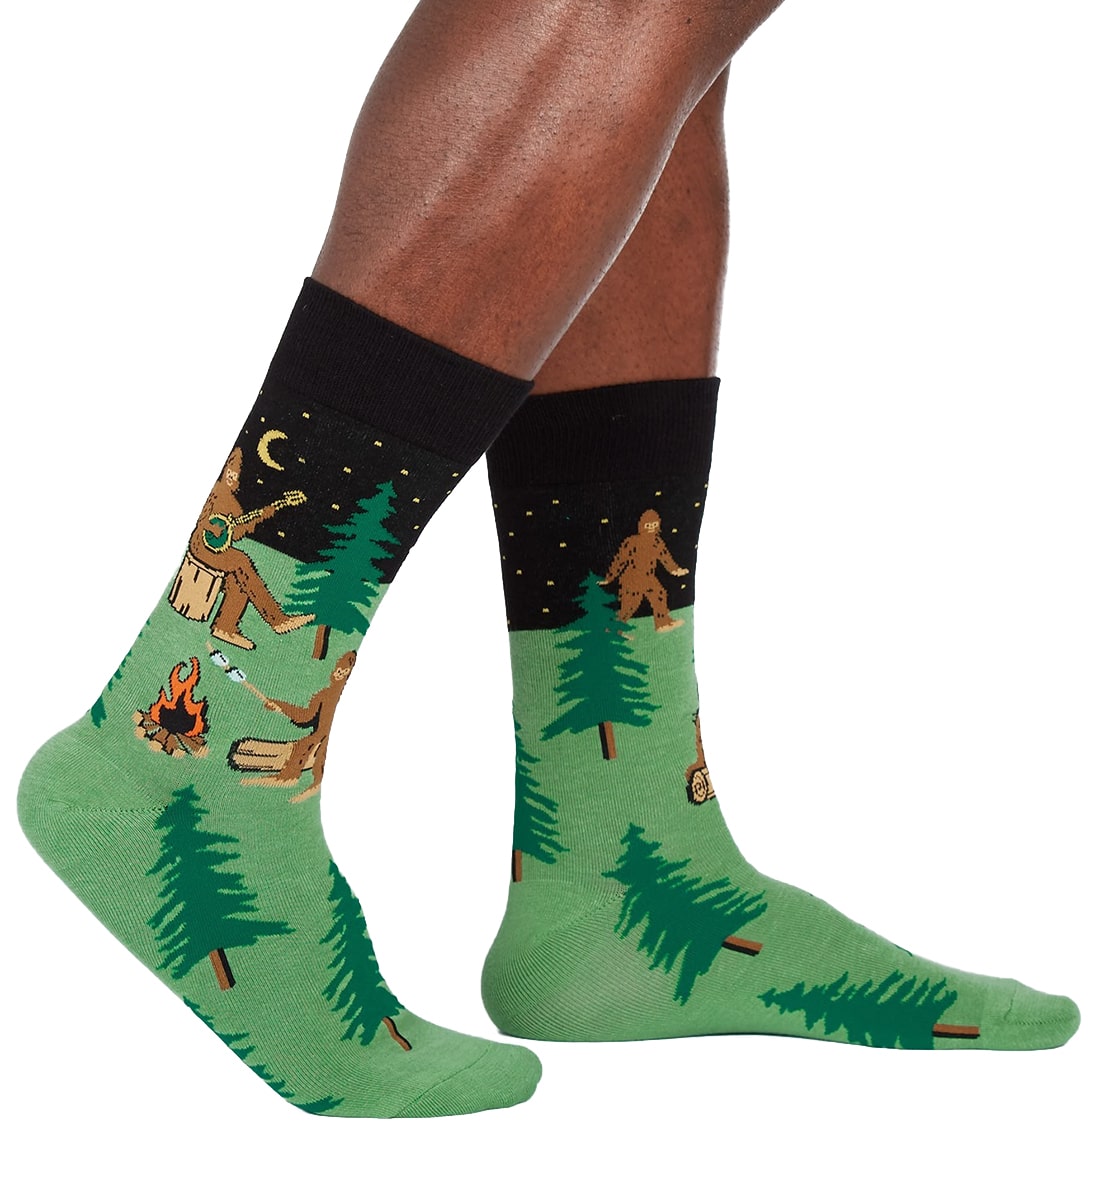 SOCK it to me Men's Crew Socks (mef0372),Sasquatch Camp Out - Sasquatch Camp Out,One Size